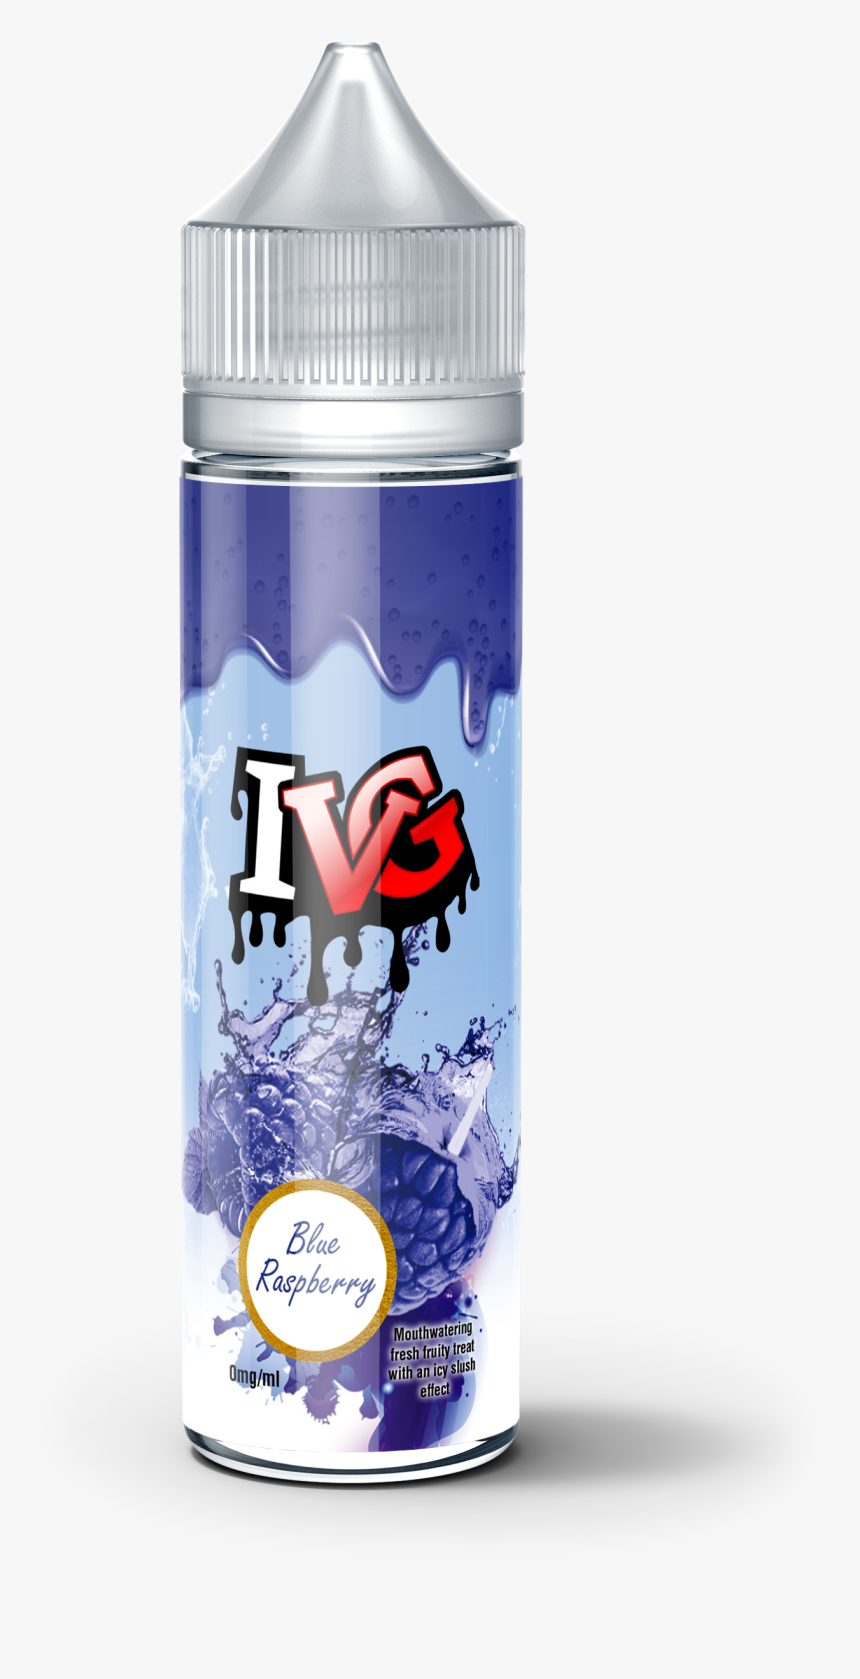 Love Vg Blue Raspberry, HD Png Download, Free Download